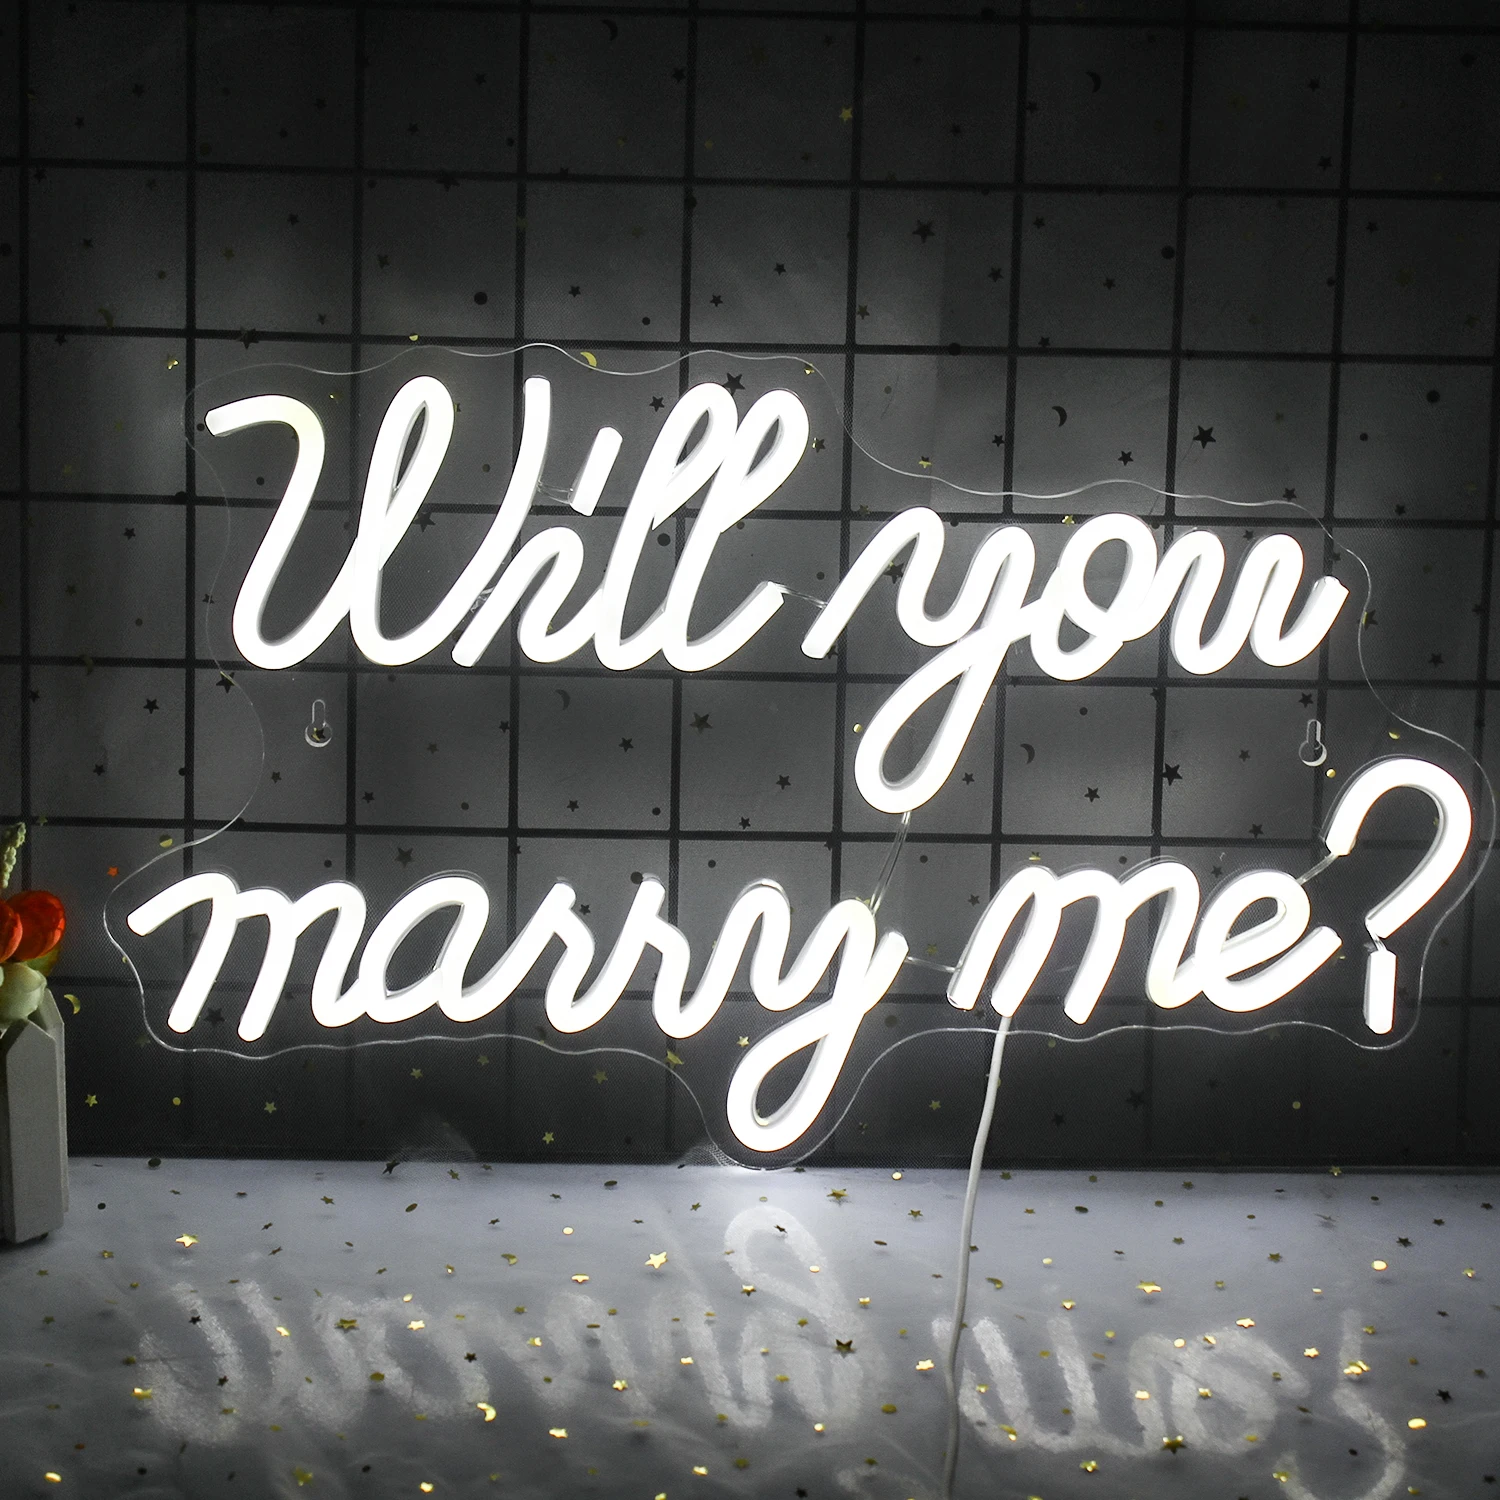 Ineonlife Will You Marry Me Neon Sign LED Light for Romantic Surprise Proposal Wedding Decorations Bedroom Wall Decor Gift Lamp